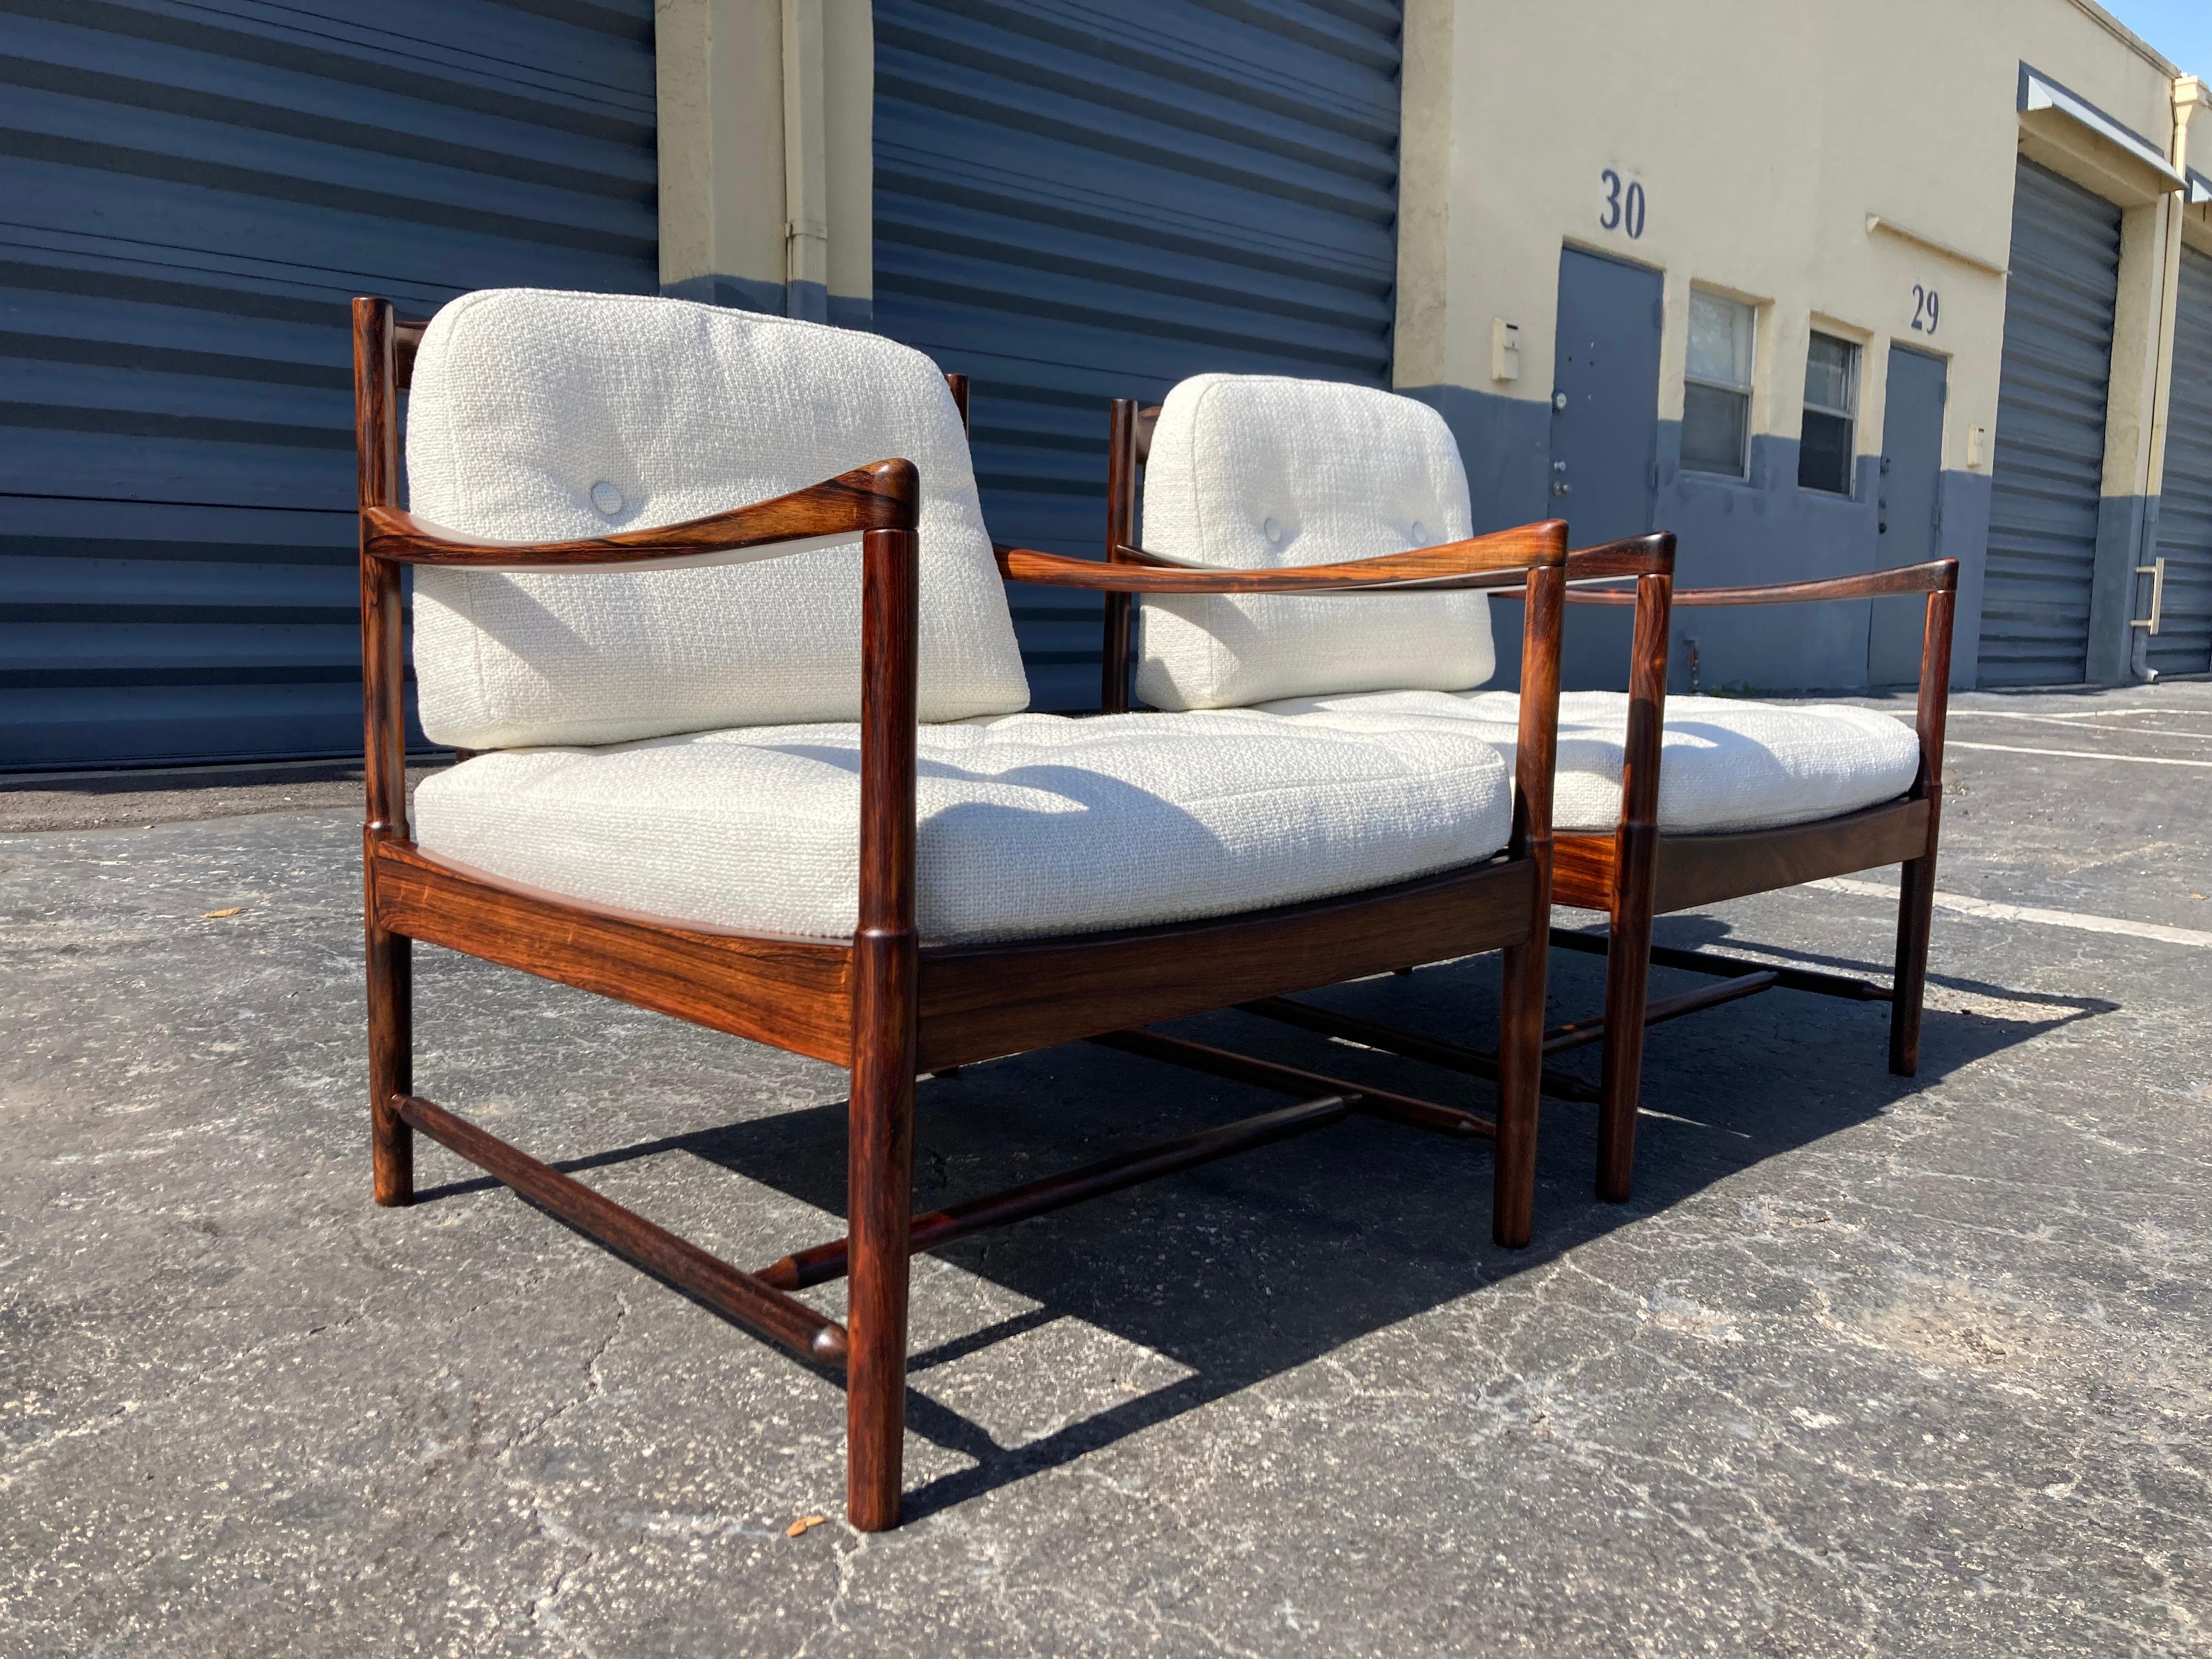 Pair of Rosewood Lounge Chairs Attributed to Kofod Larsen. Frames were fully restored, new high quality ivory white fabric cushions. Ready for new home.